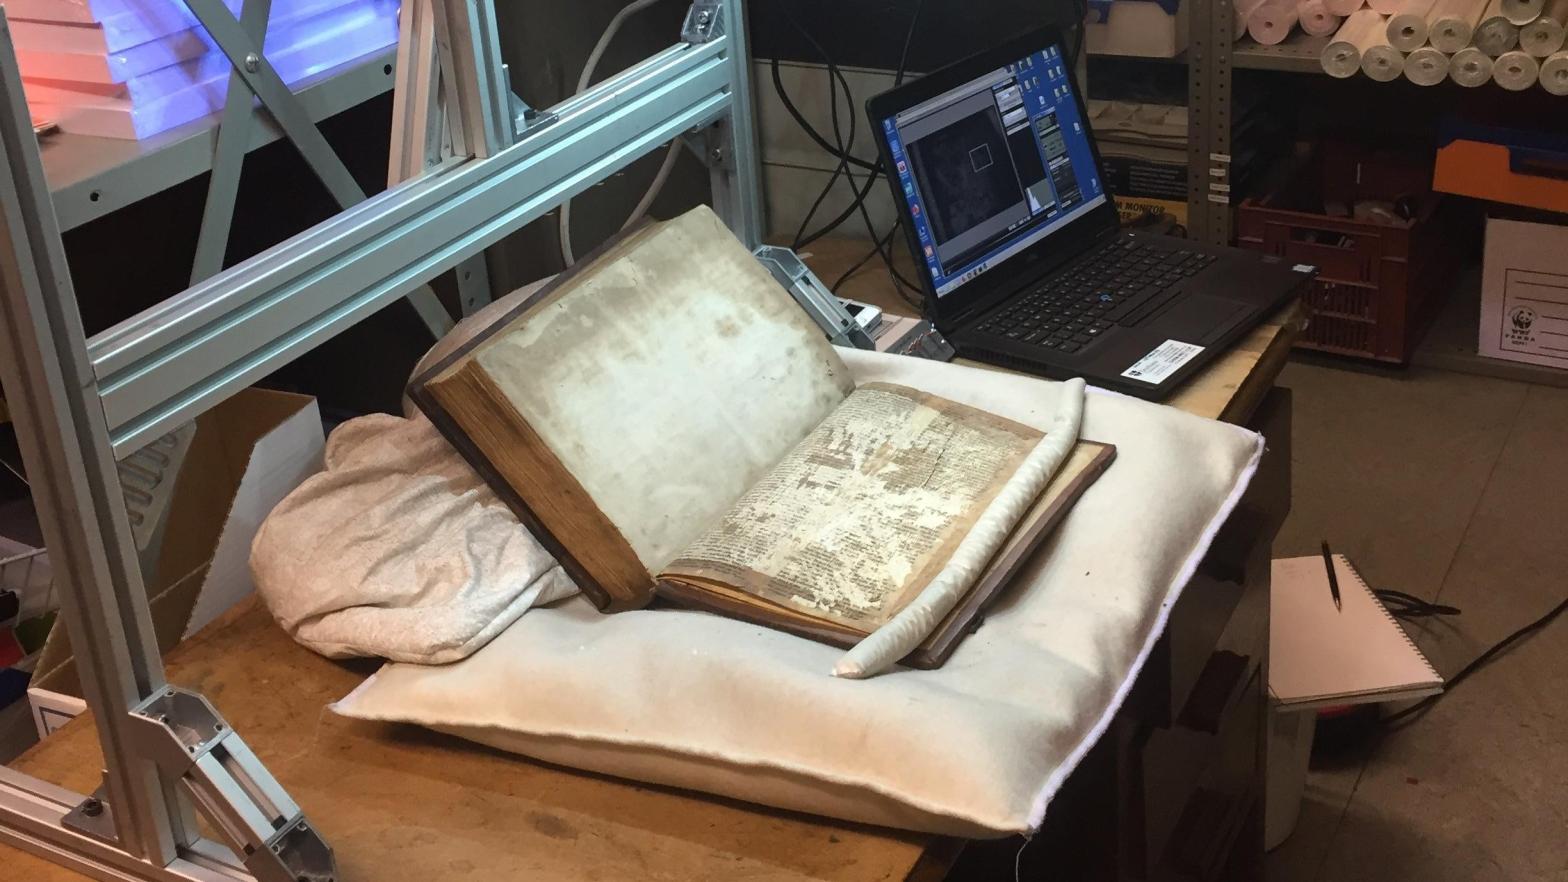 The book with the fragments getting multi-spectral scanning to enhance the faded ink. (Photo: Leah Tether)